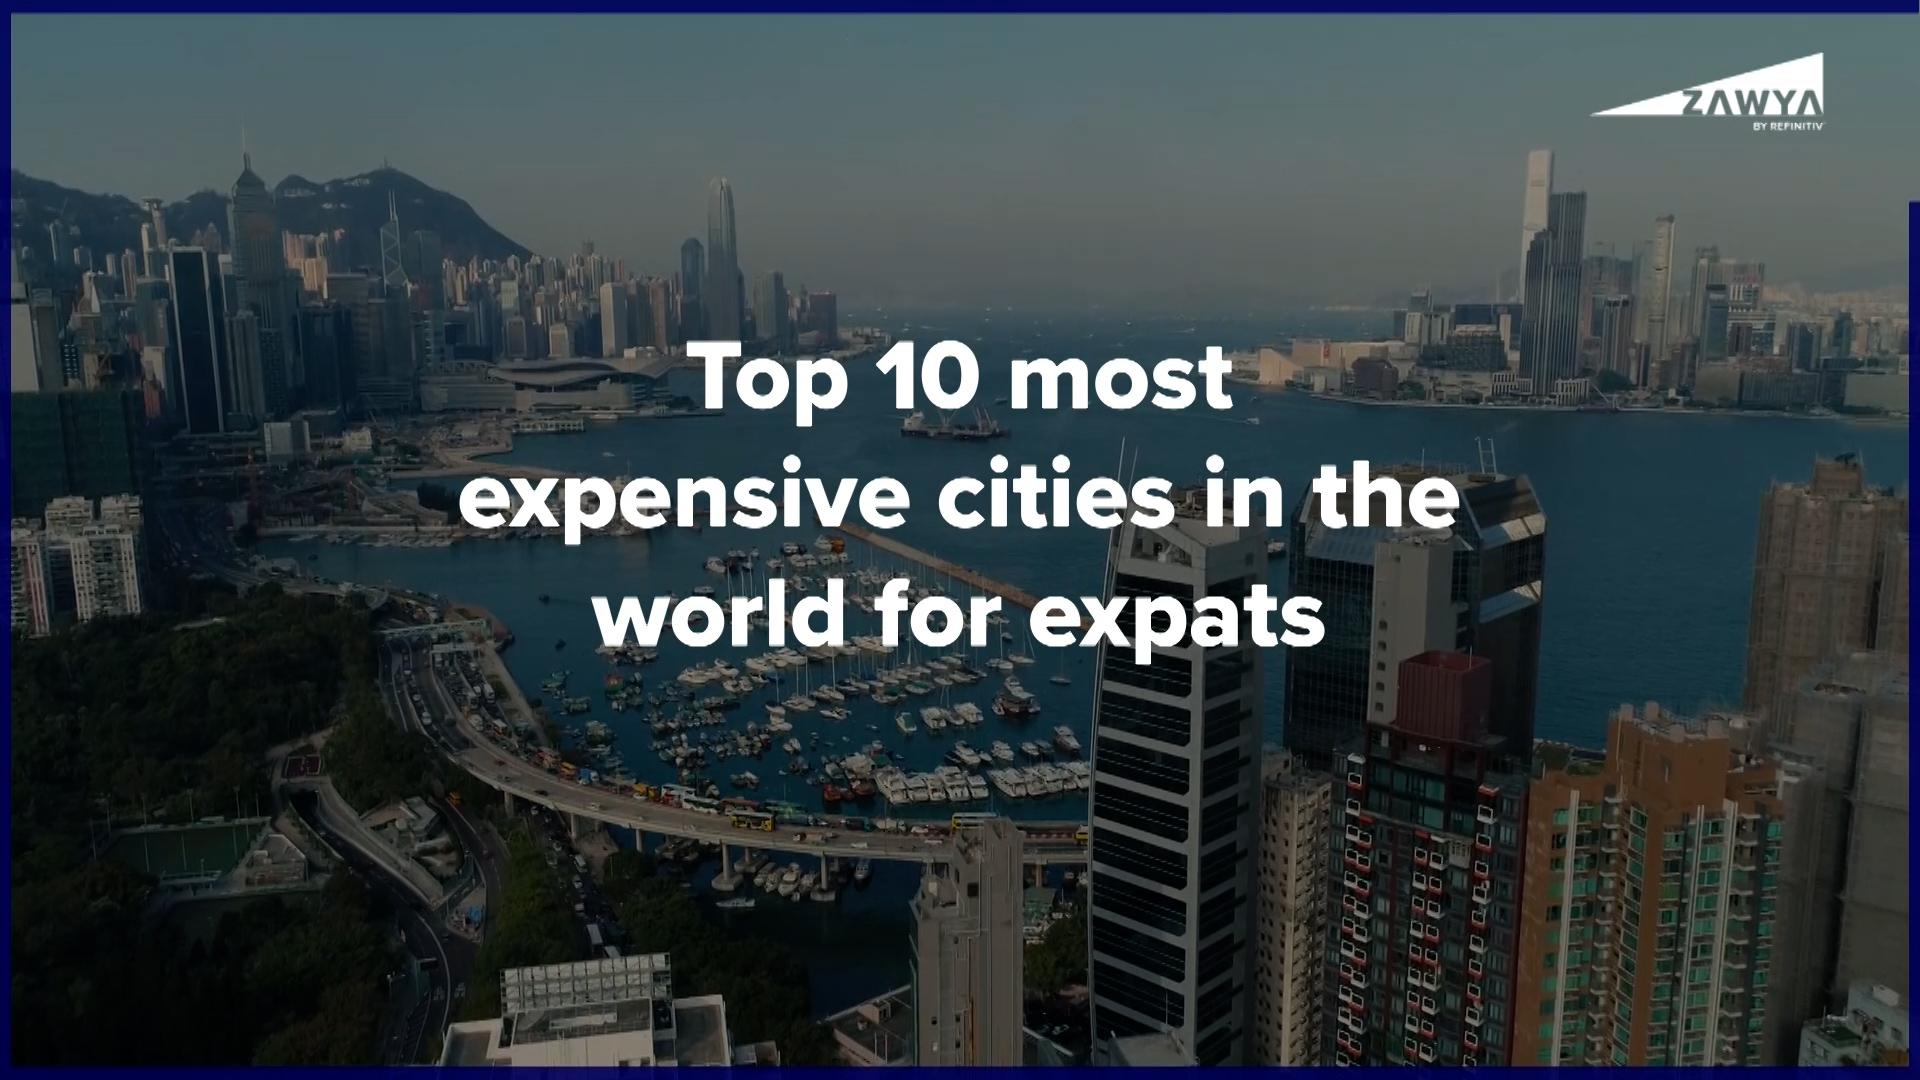 10 most expensive cities in the world for expats